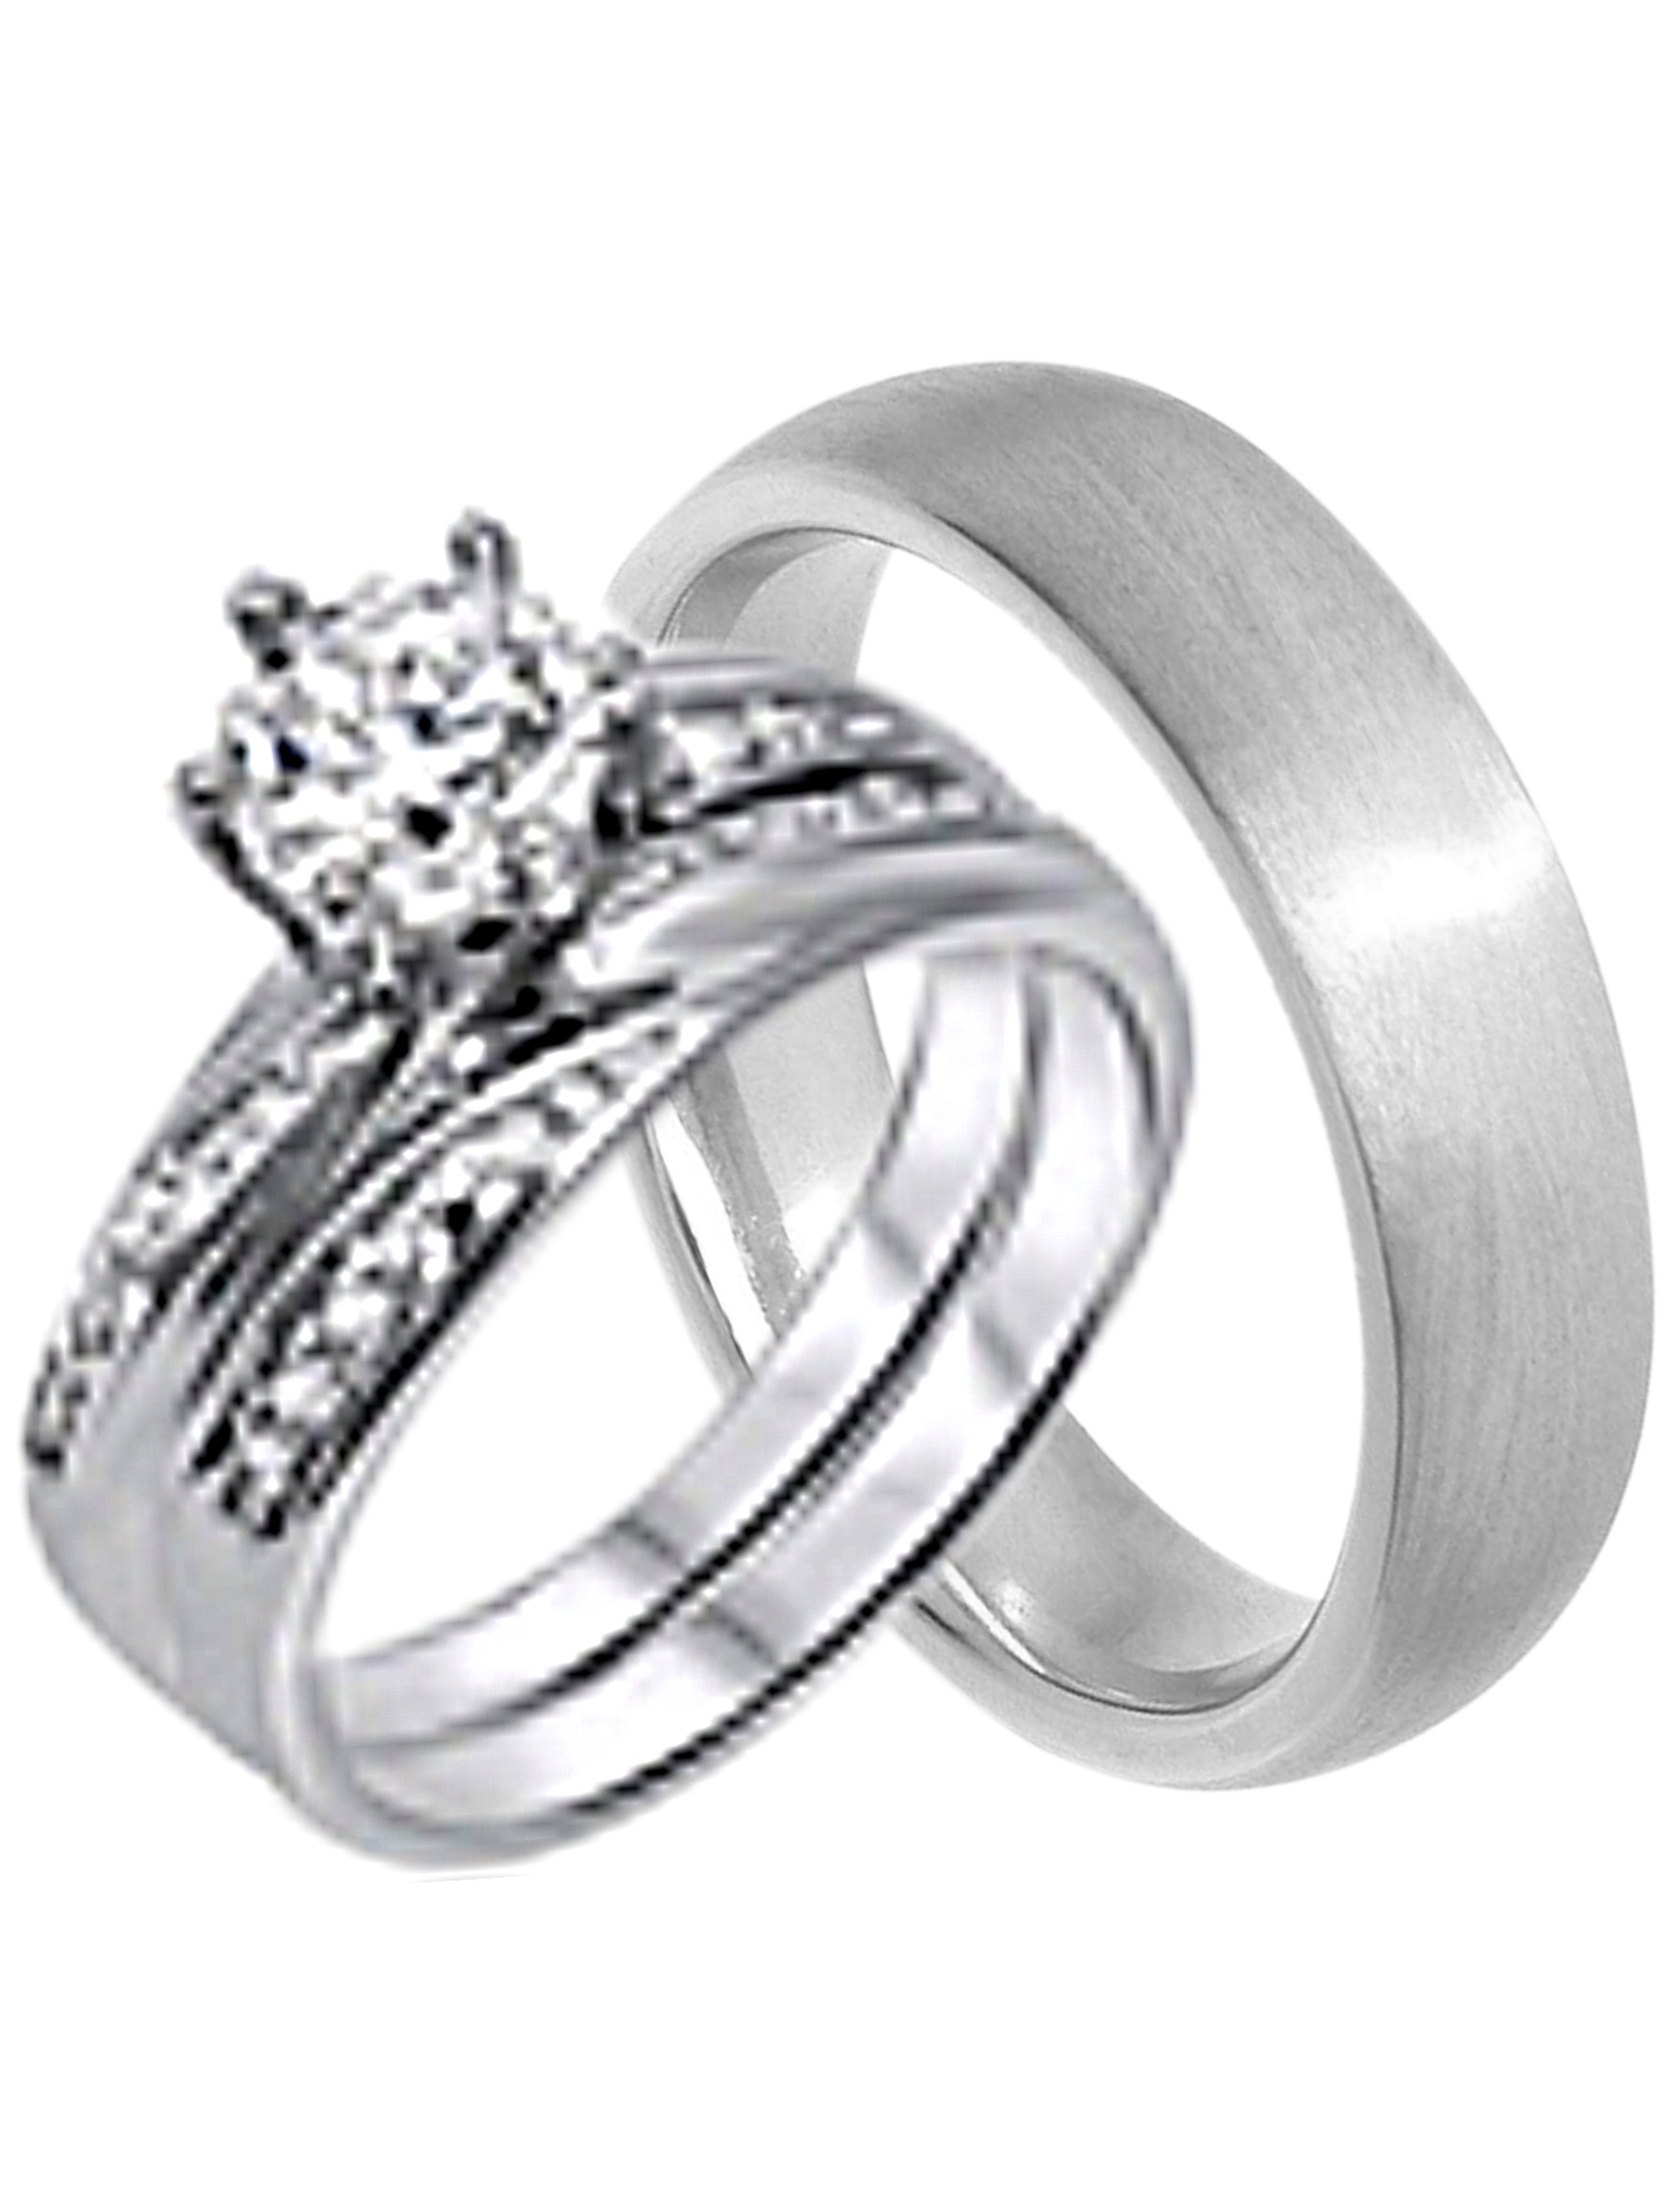 Walmart Wedding Rings Sets For Him And Her
 His and Hers Wedding Ring Set Cheap Wedding Bands for Him